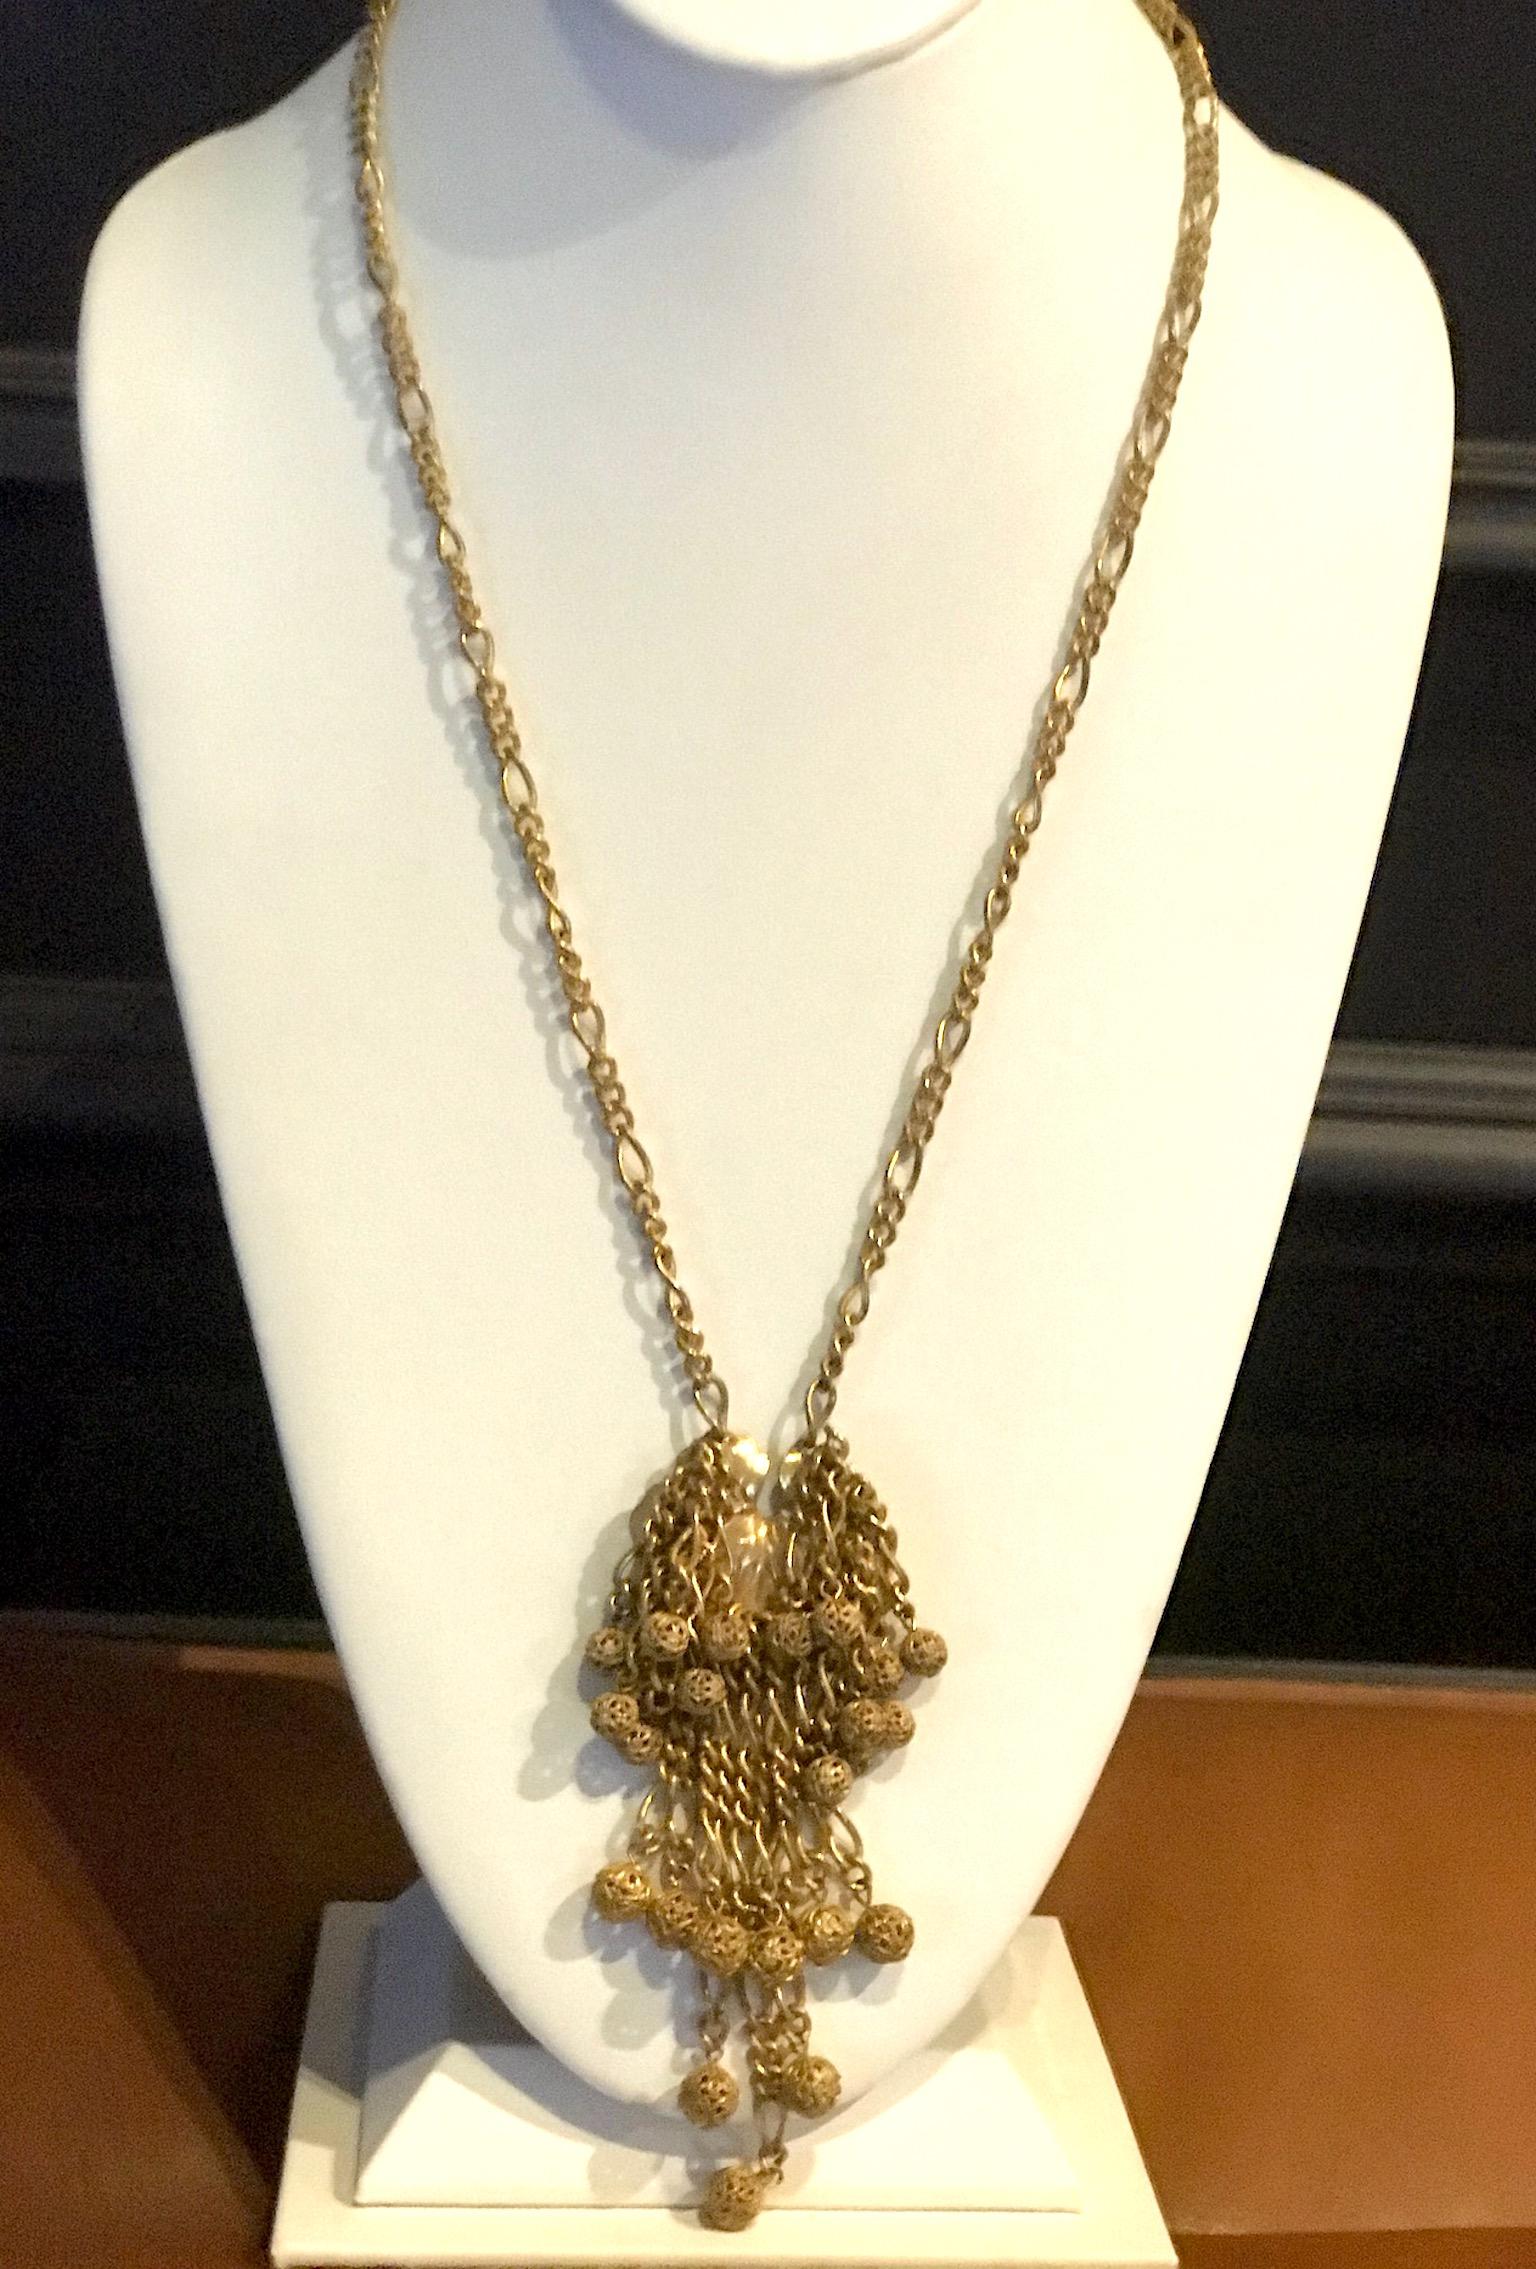 A vintage 1960s Miriam Haskell necklace in her famous Russian Gold finish. The necklace pendant is a lily pad hidden behind the chain fringe. Each of the chains from the lily pad is finished on the end with a filigree ball. The chain of the necklace